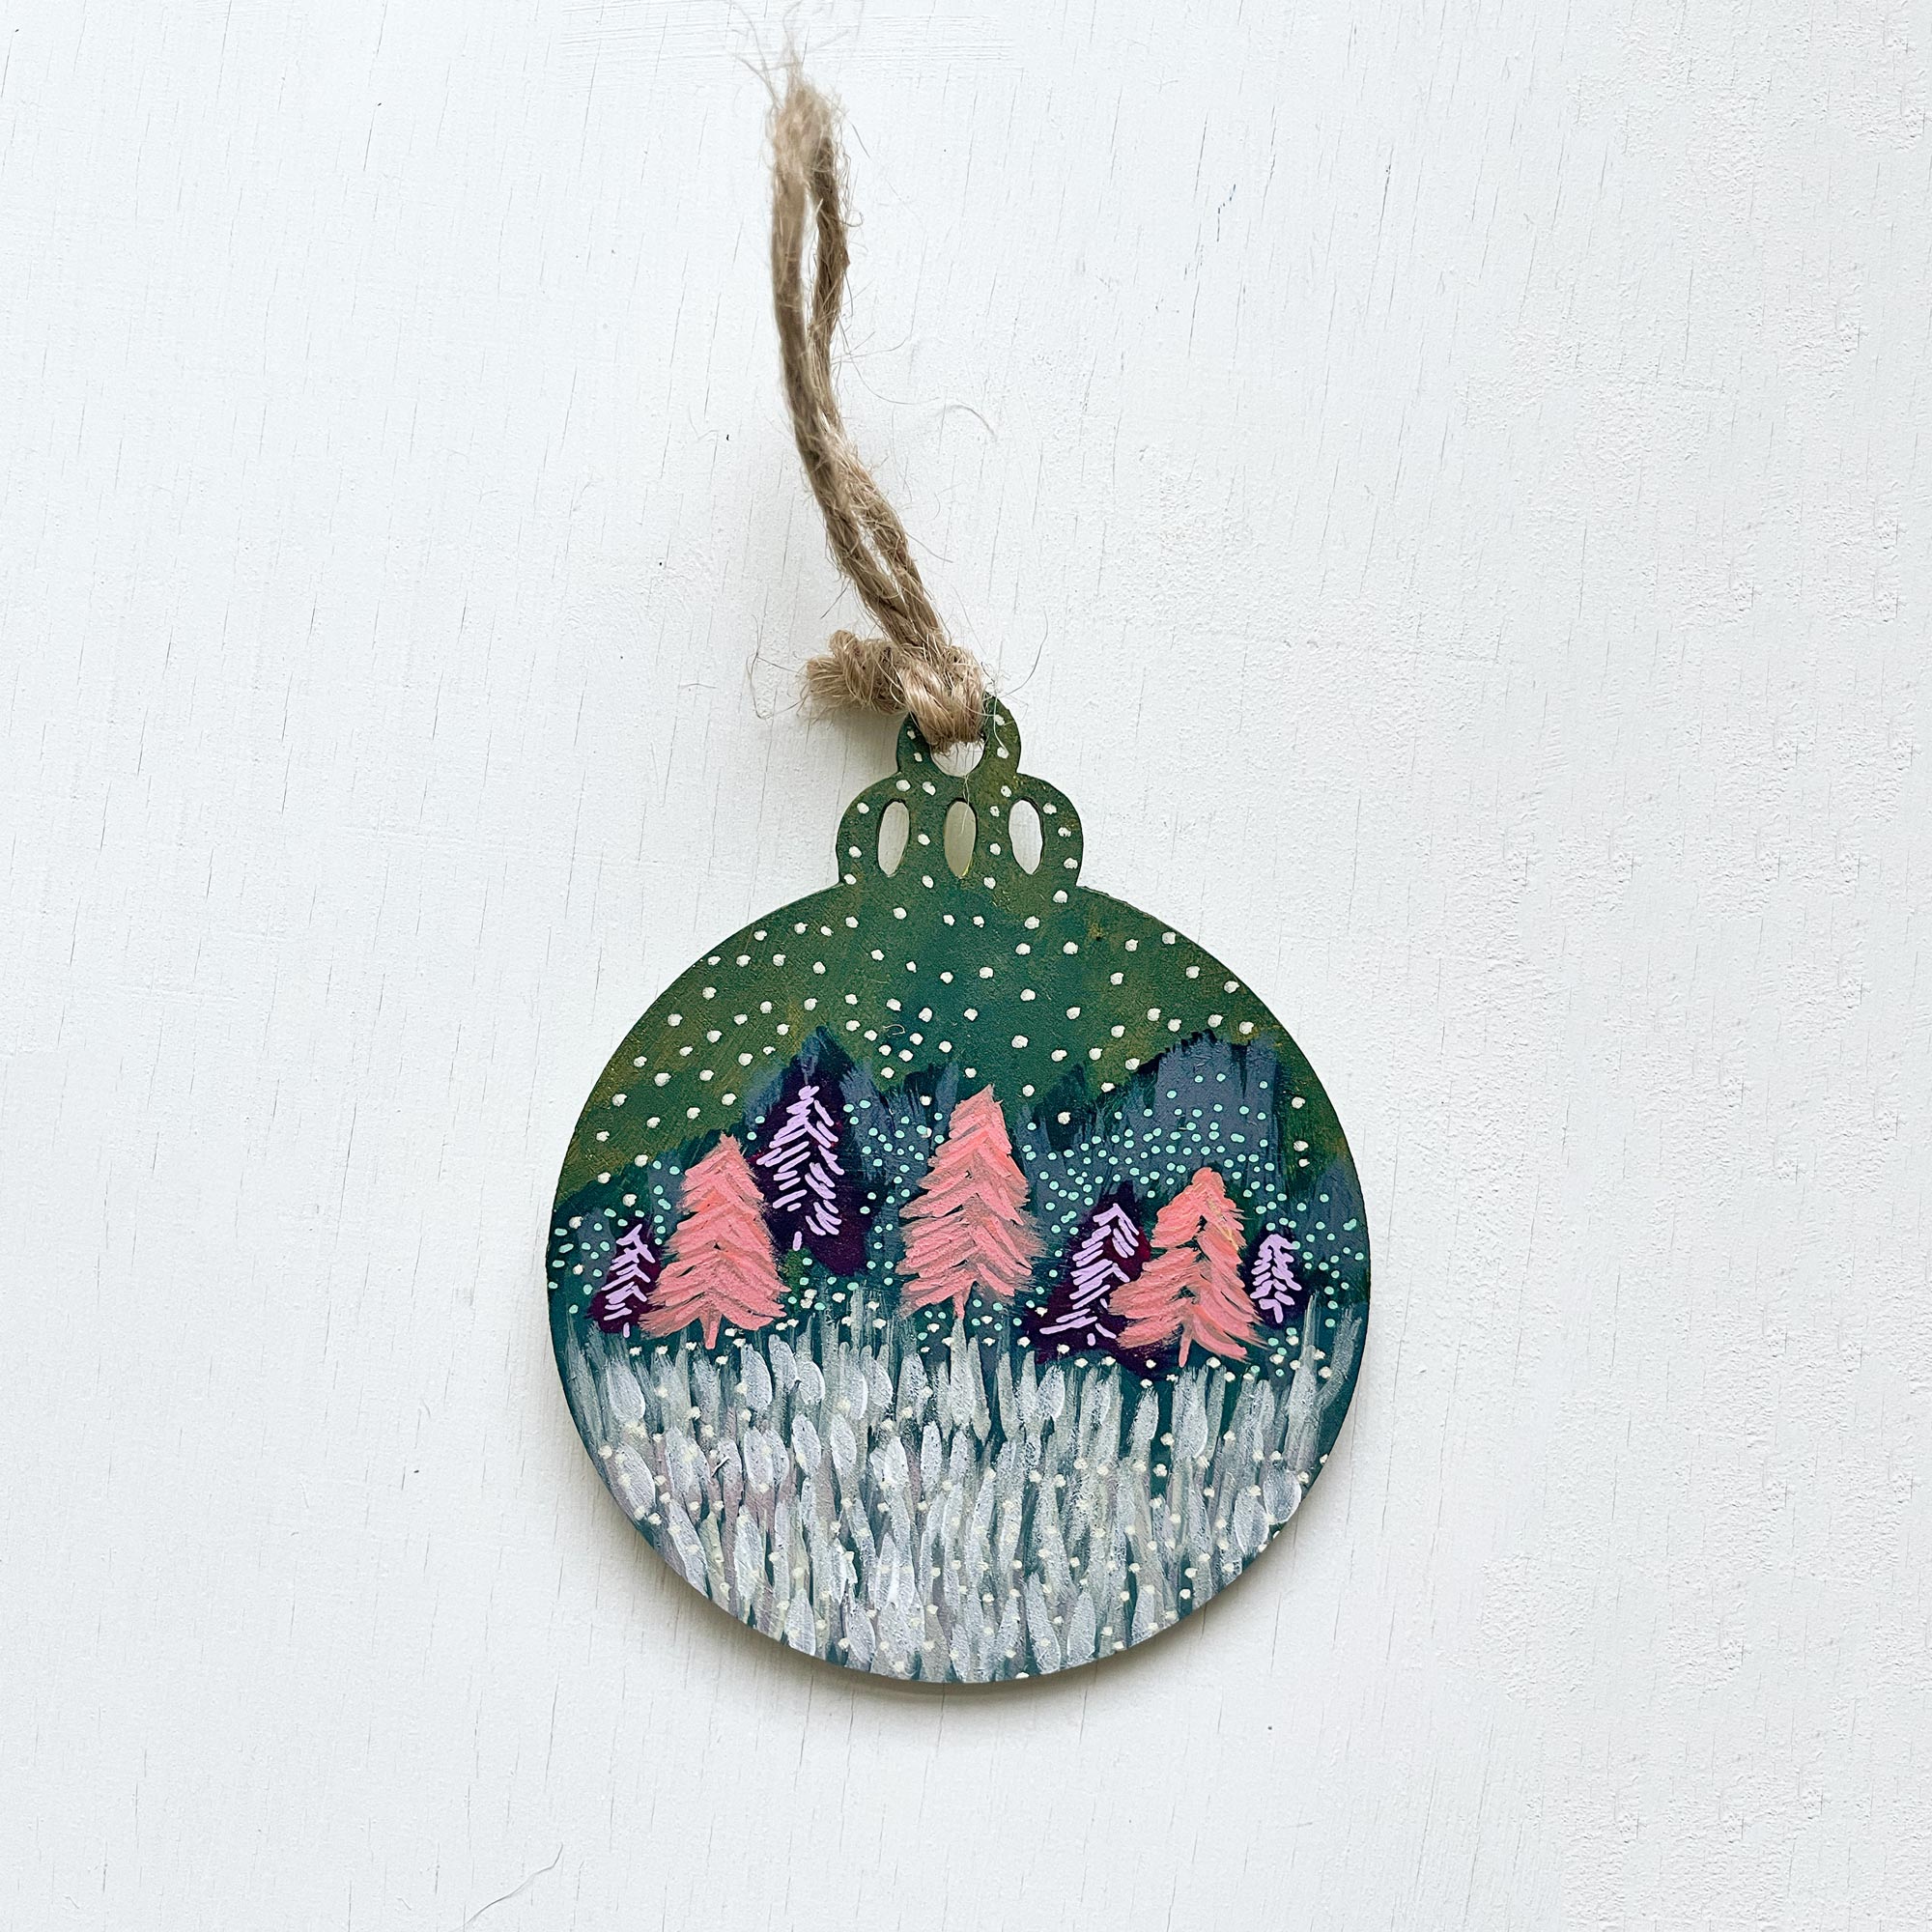 Winter Forest I - Hand-Painted Christmas Ornament